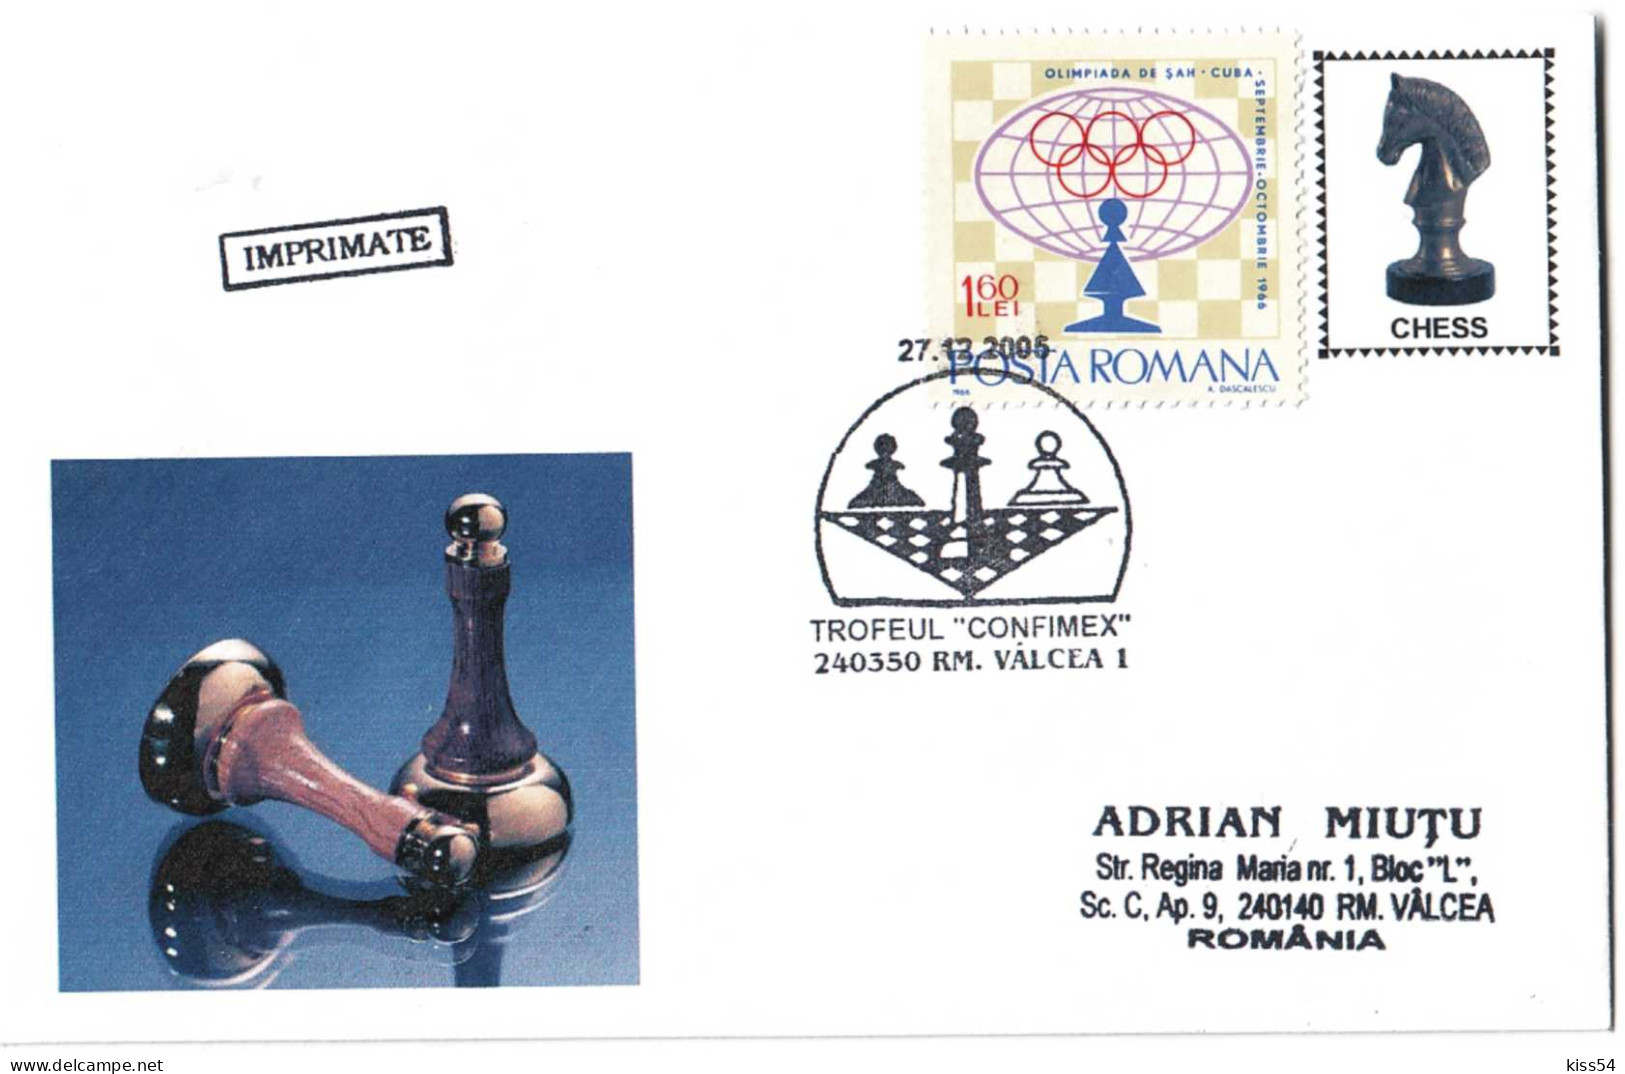 COV 67 - 214 CHESS, Romania - Cover - Used - 2005 - Covers & Documents